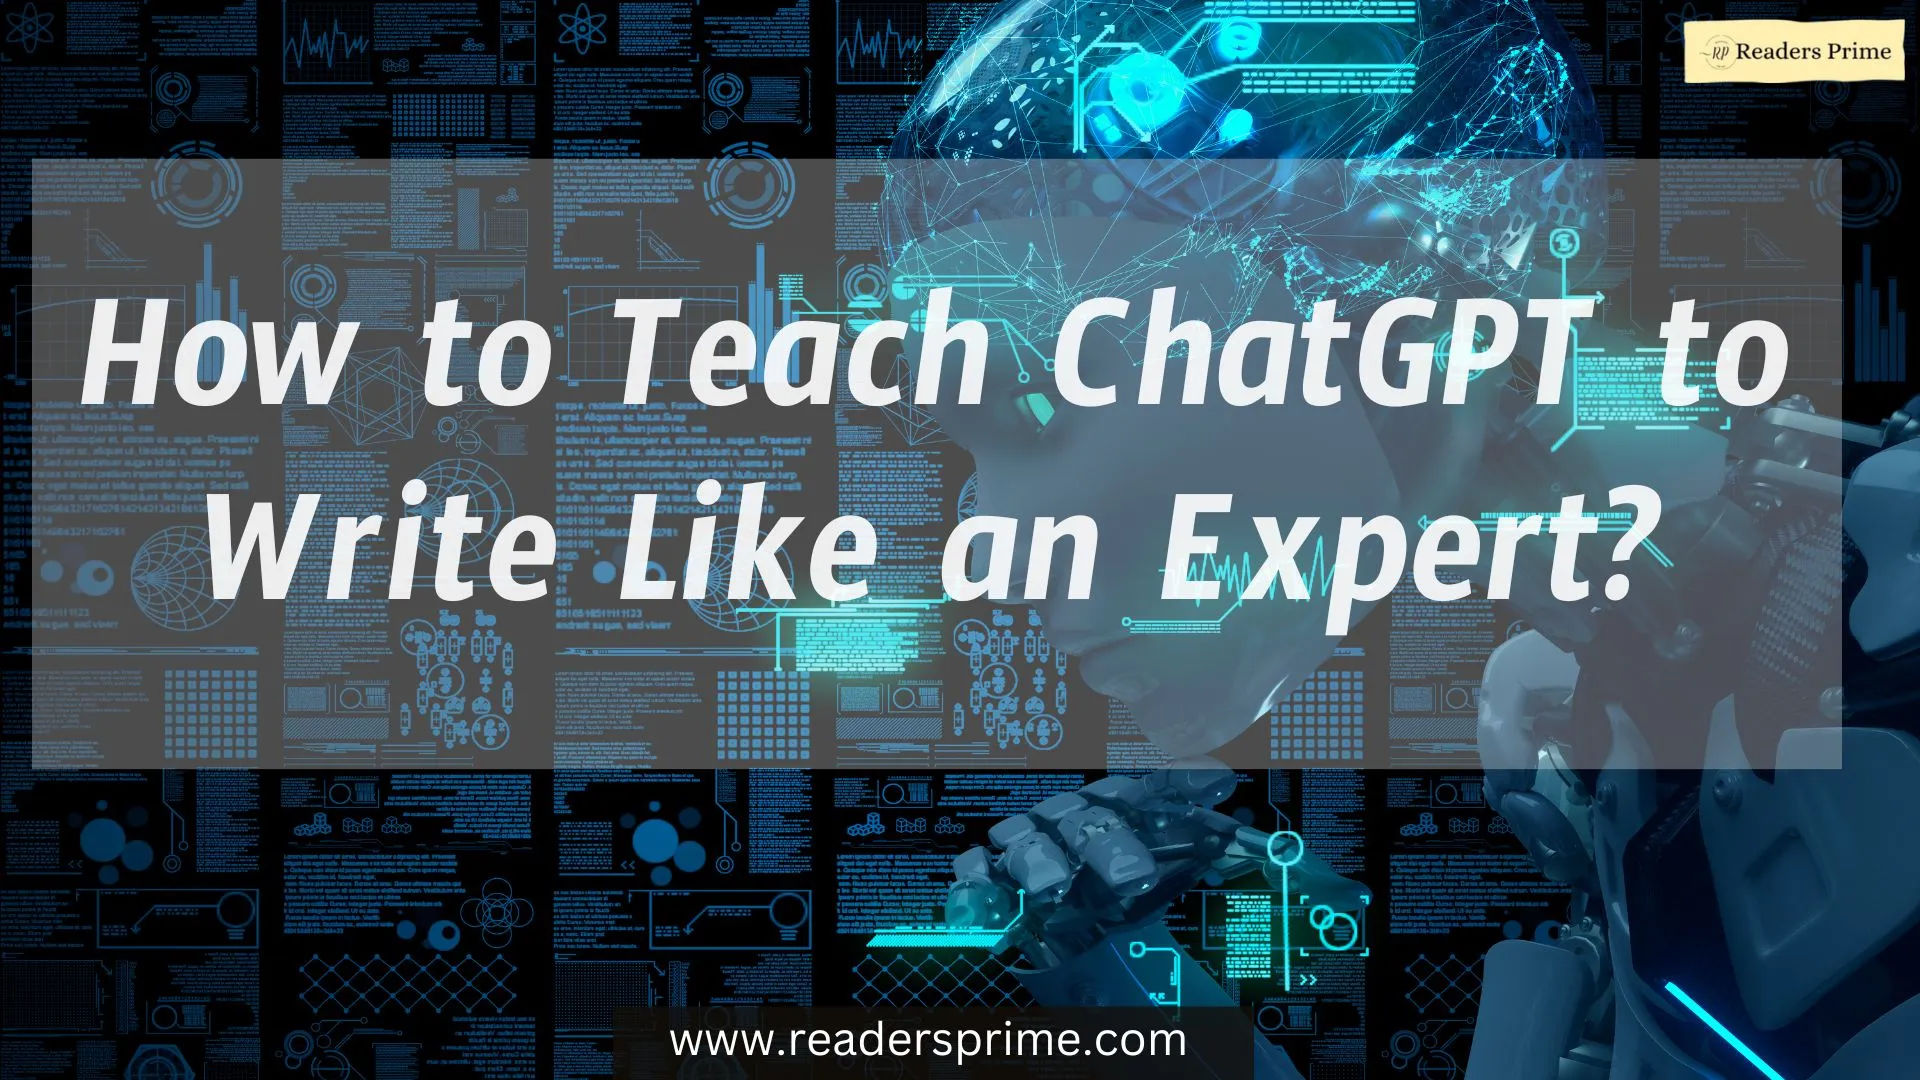 How to Teach Chat GPT to Write Like an Expert?